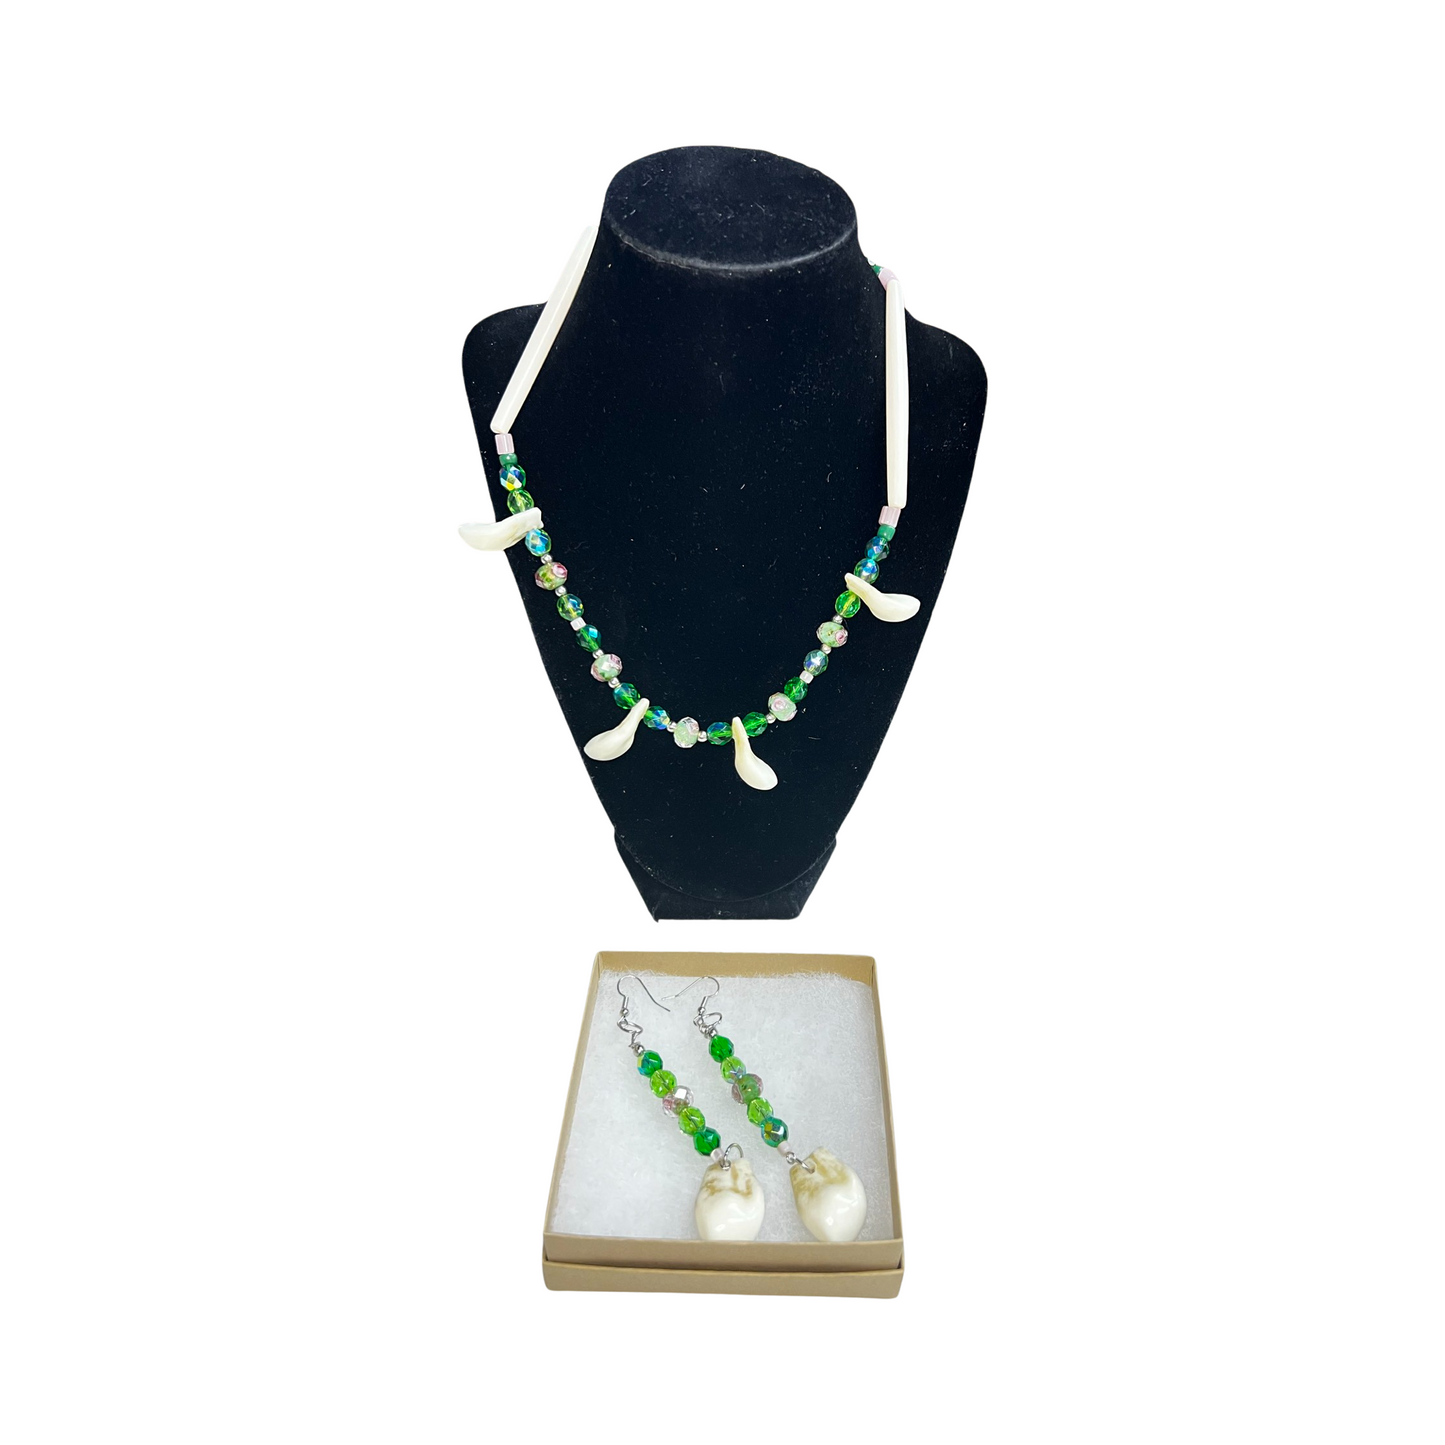 AM Necklace and Earrings Set